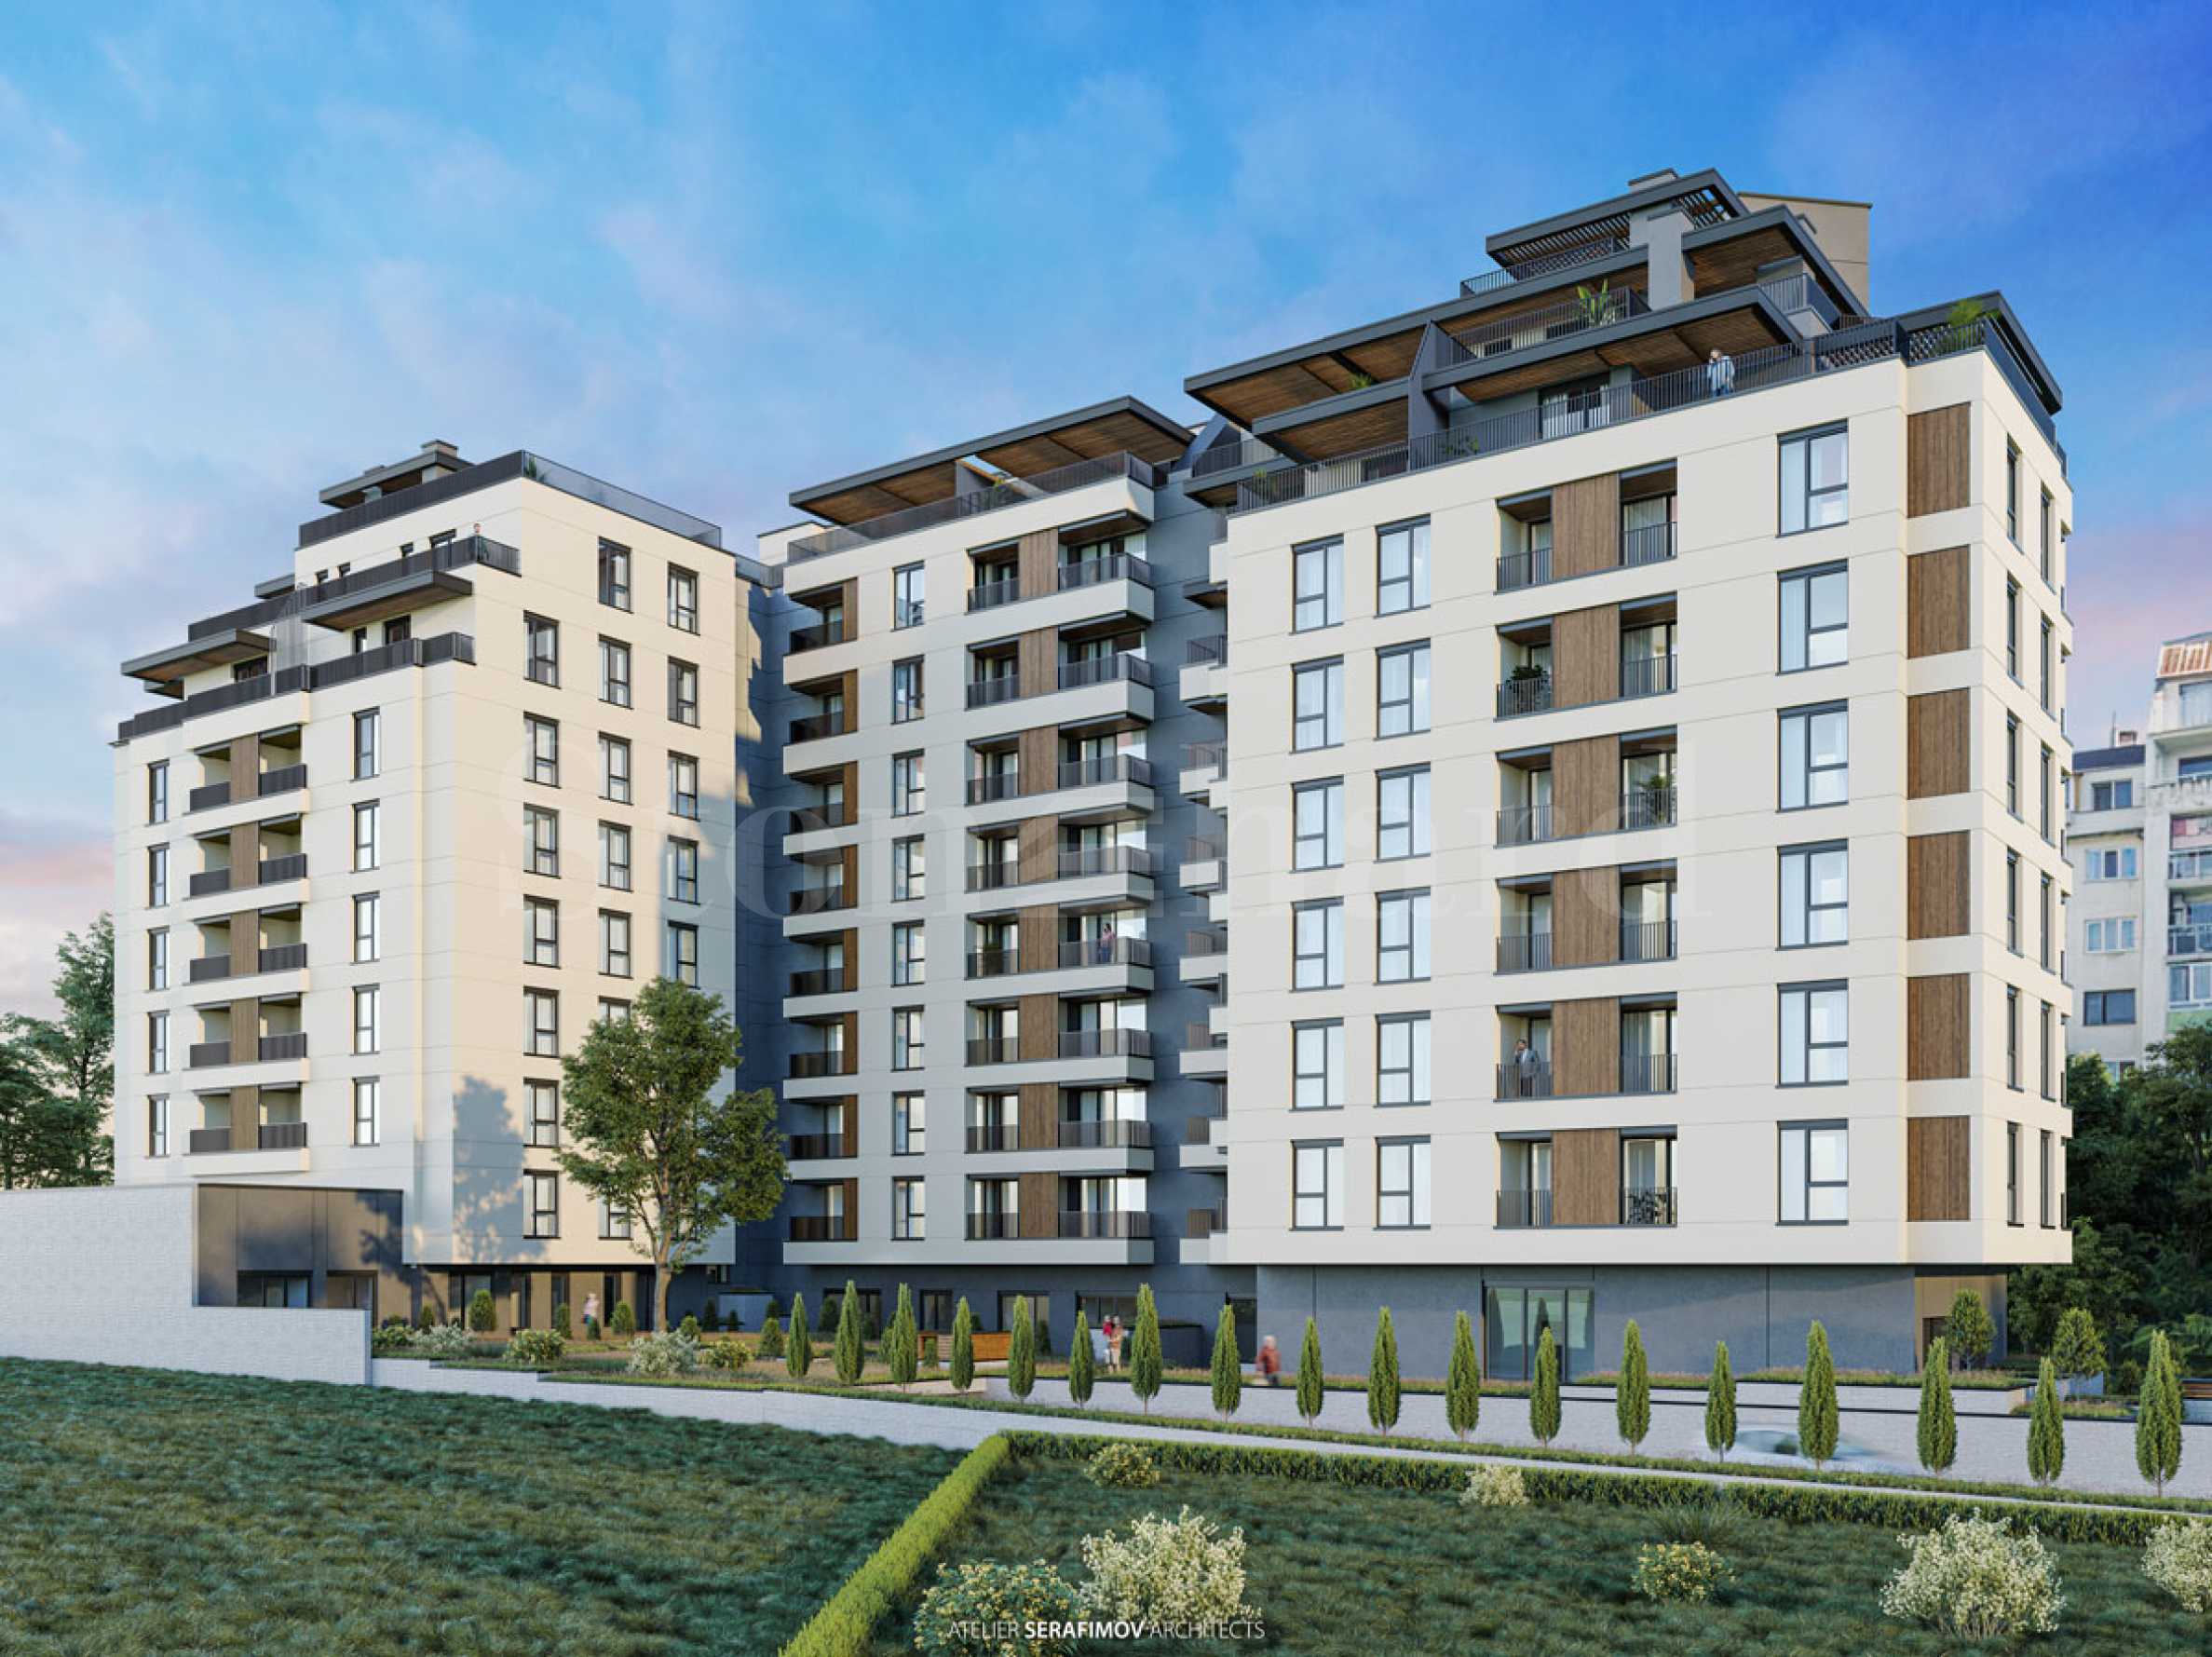 Apartments in a new residential complex next to Business Park Sofia2 - Stonehard